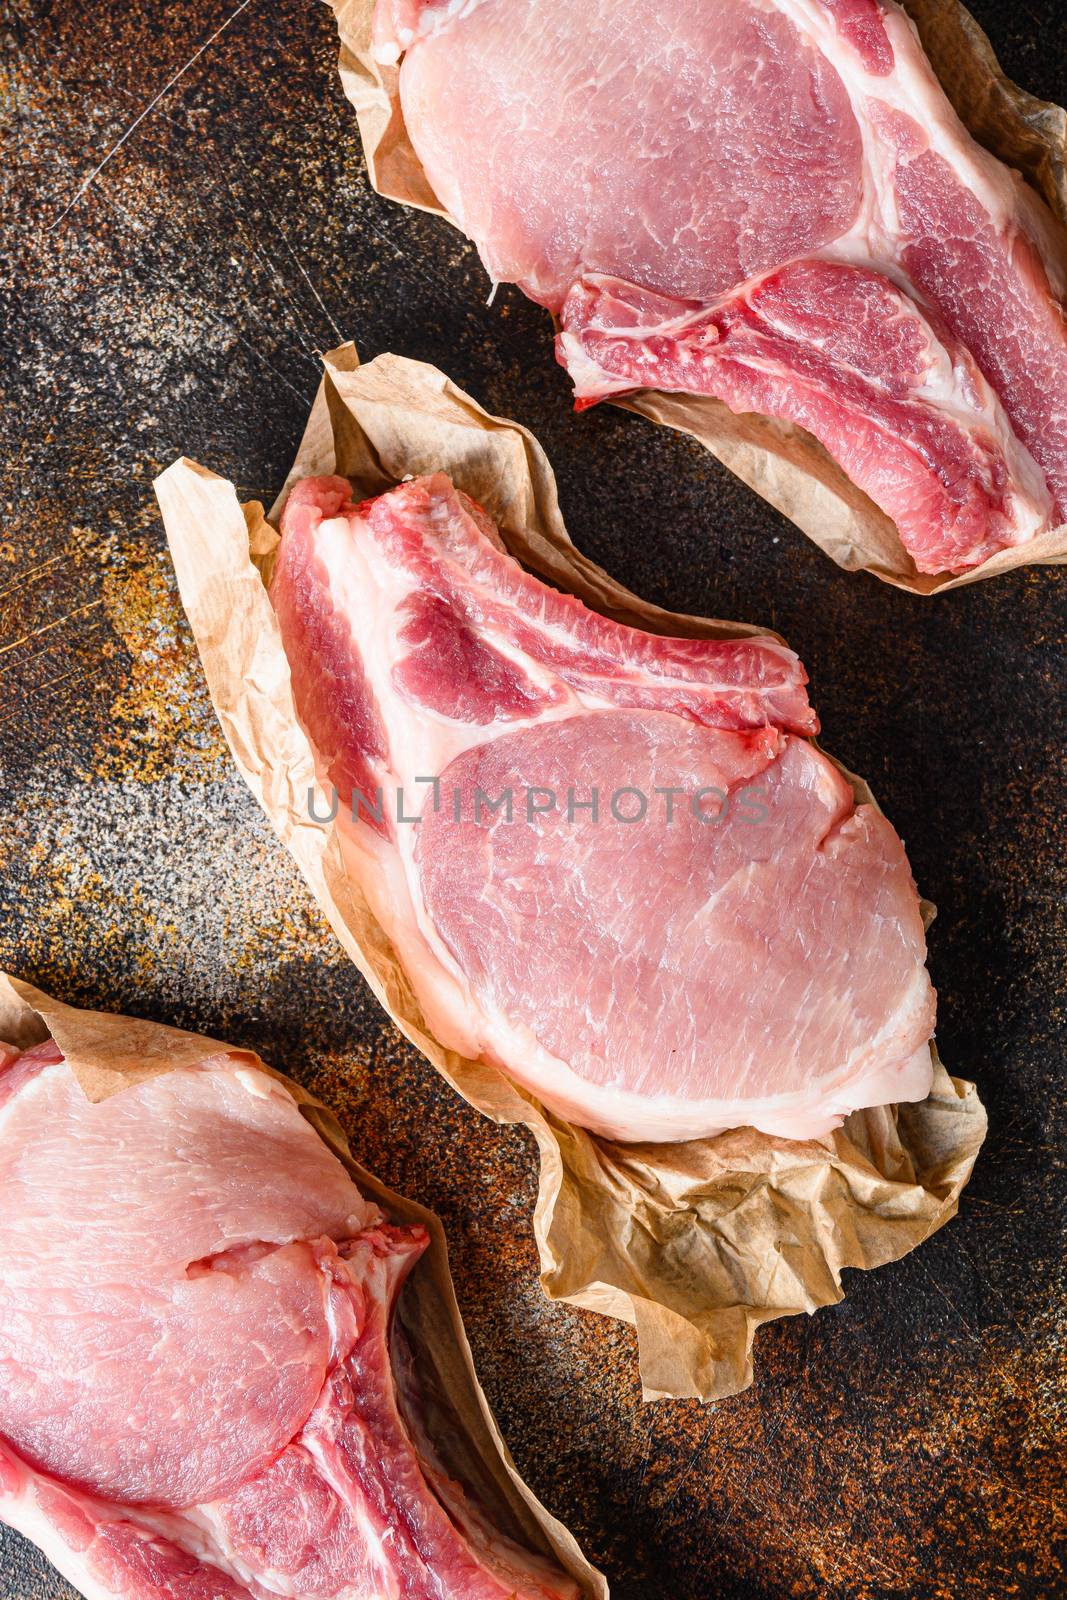 Raw pork loin chops shot from above on craft paper over rustic old metal background stock photo.